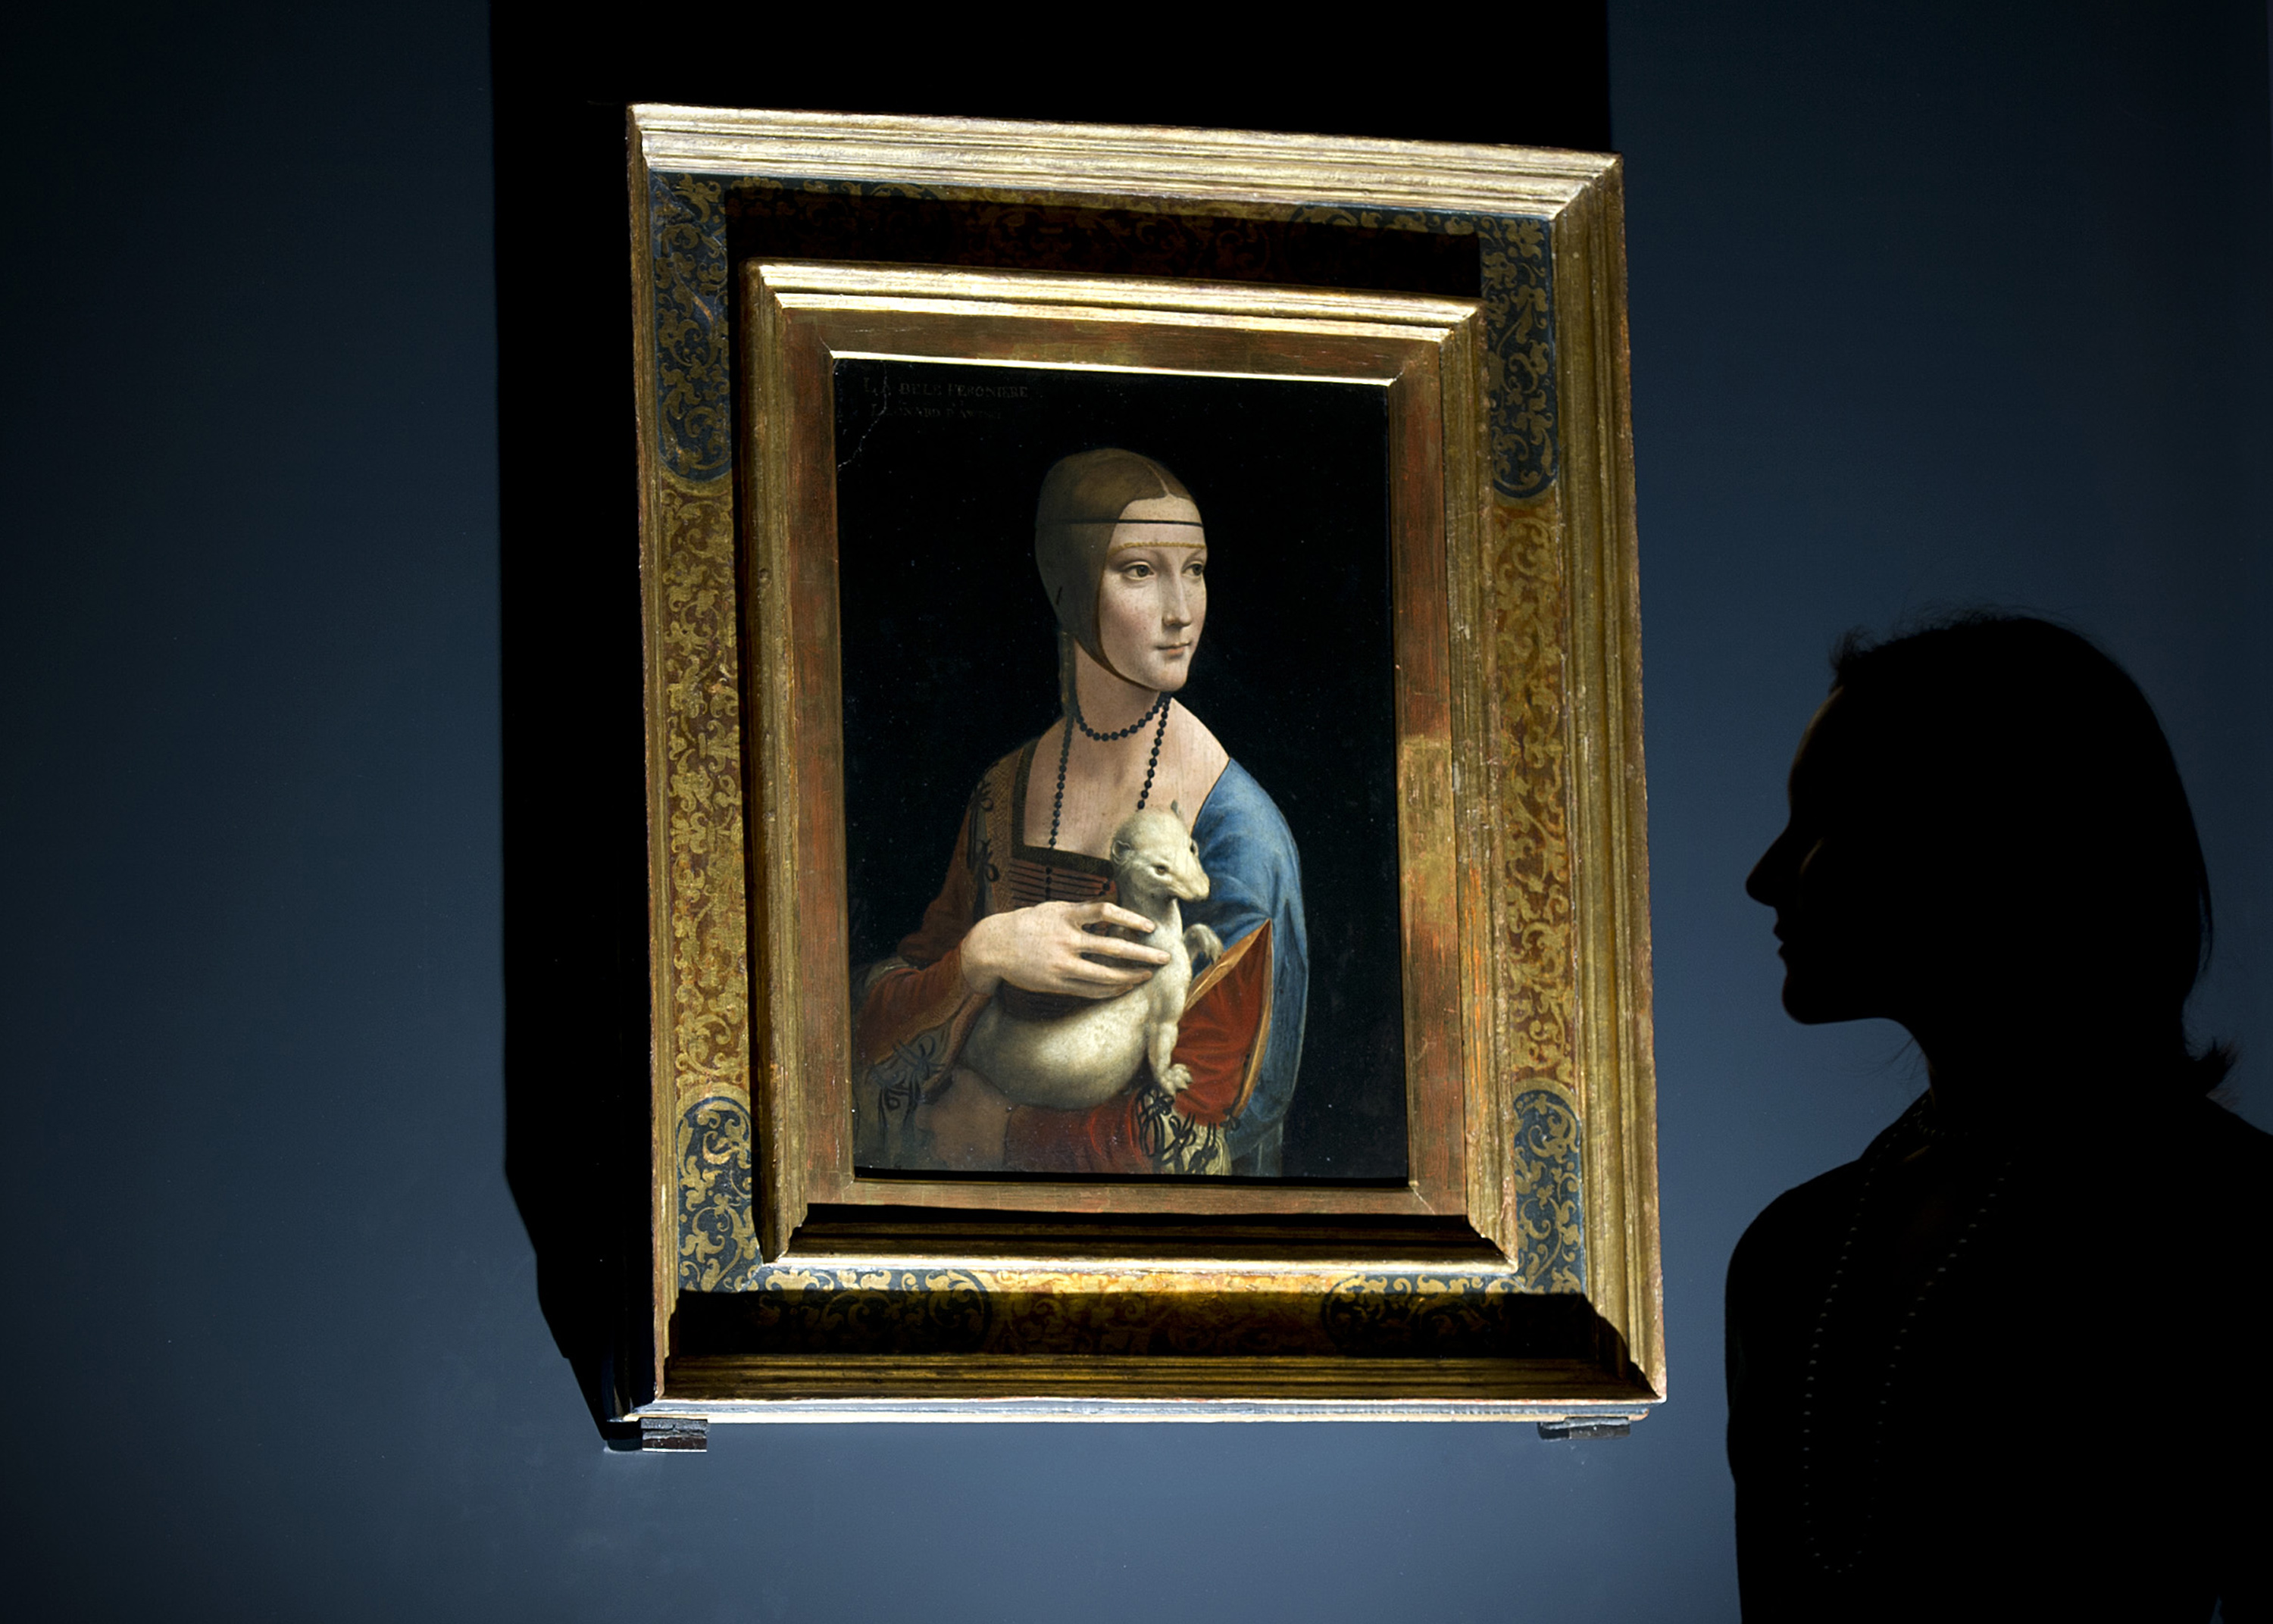 (FILES) This file photo taken on November 7, 2011 shows a woman posing for pictures beside a painting entitled 'Portrait of Cecilia Gallerani' (The Lady with an Ermine) by Italian artist Leonardo da Vinci during a photocall at the National Gallery in London. As it was confirmed on December 13, 2016, the Polish State would like to buy back the famous painting from the Czartoryski princes' family. / AFP PHOTO / CARL COURT / RESTRICTED TO EDITORIAL USE - MANDATORY MENTION OF THE ARTIST UPON PUBLICATION - TO ILLUSTRATE THE NEWS AS SPECIFIED IN THE CAPTION